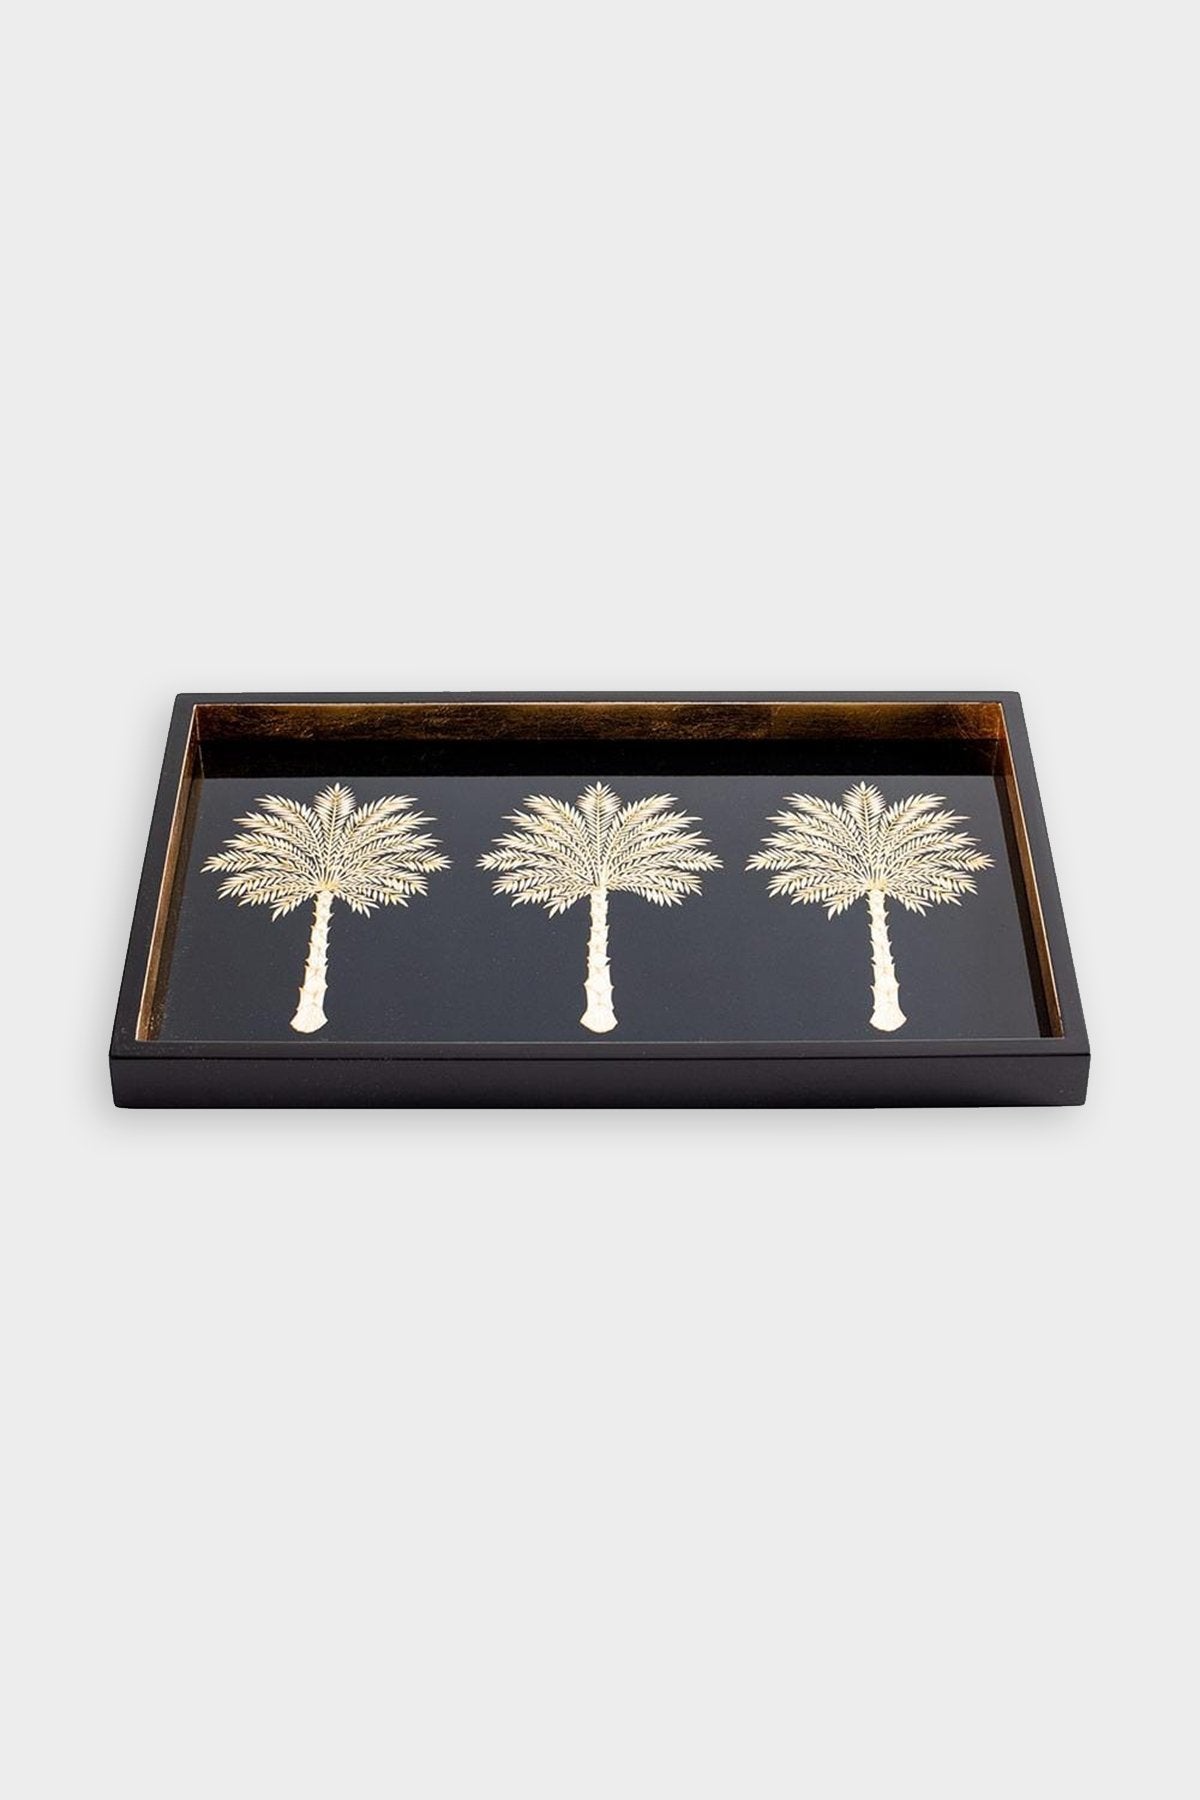 Grand Palms Lacquer Vanity Tray in Black - shop-olivia.com